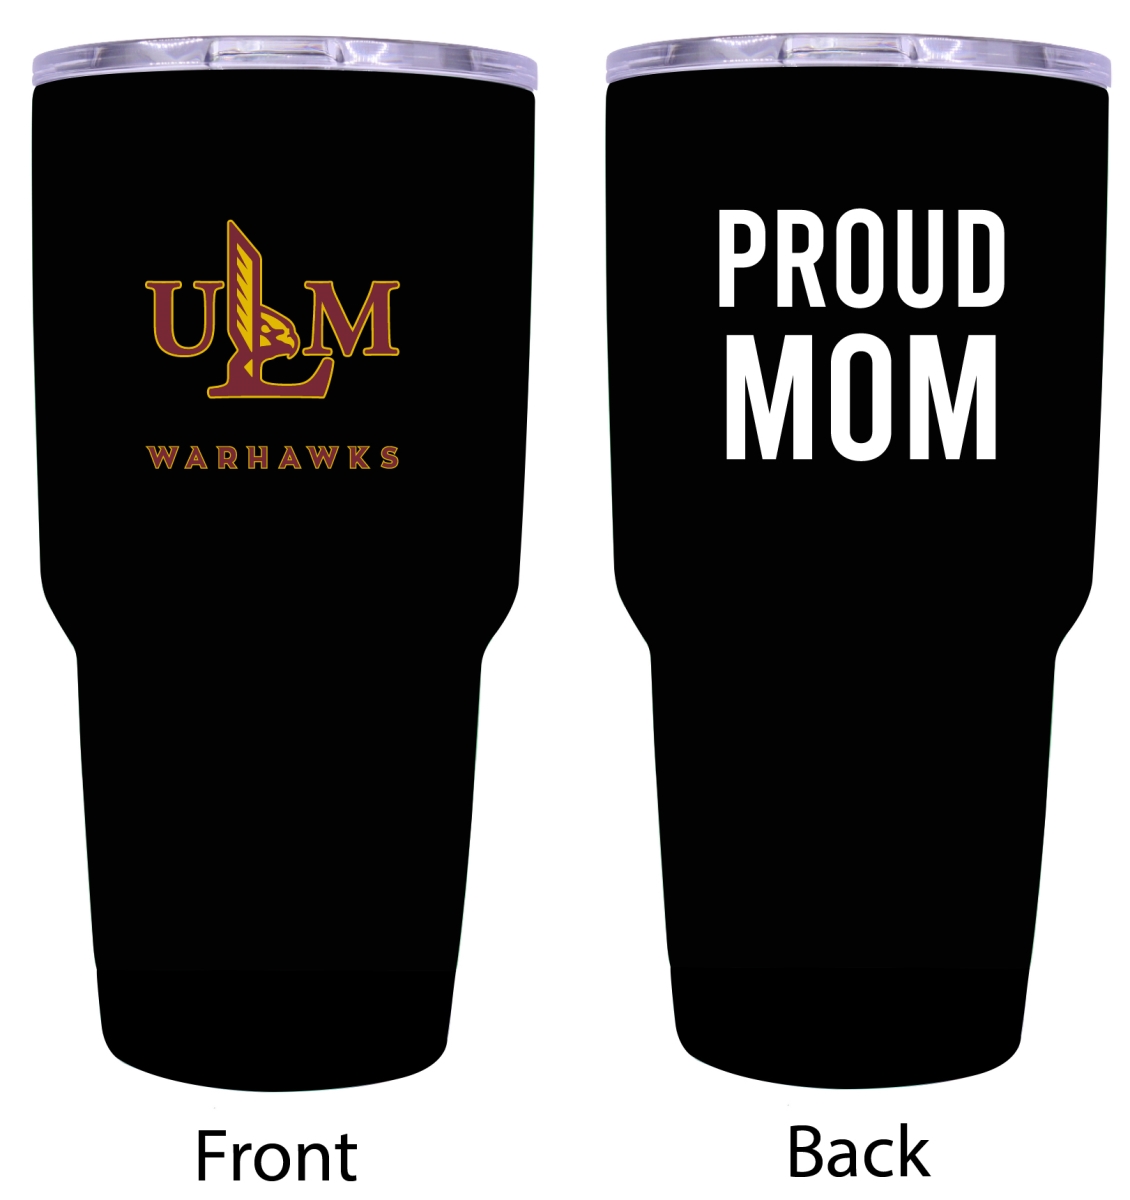 Picture of R & R Imports ITB-C-LAM20 MOM University of Louisiana Monroe Proud Mom 20 oz Insulated Stainless Steel Tumblers